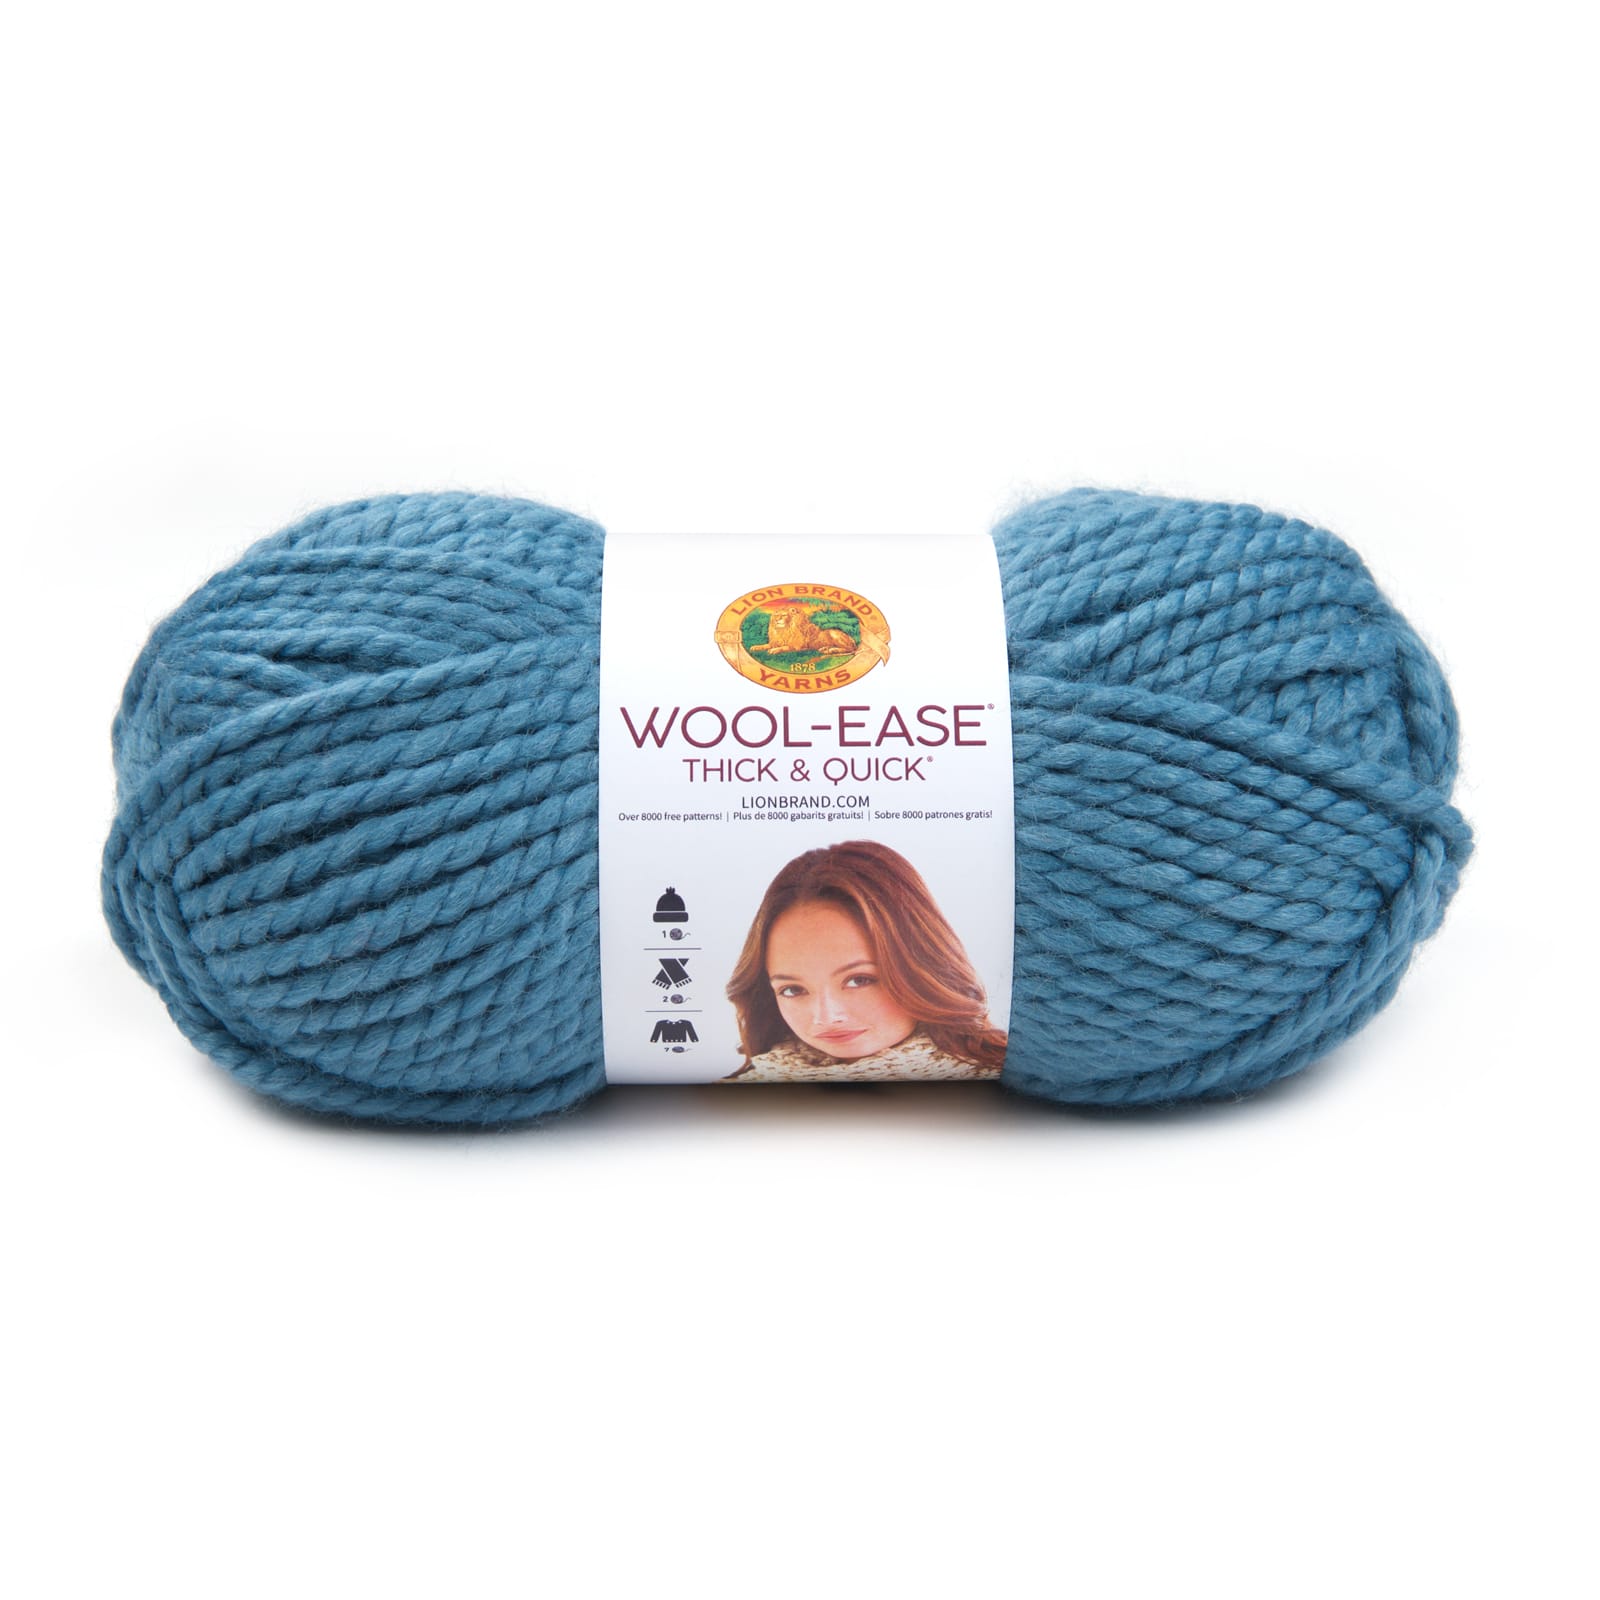 lion brand yarn wool-ease thick & quick yarn, soft and bulky yarn for